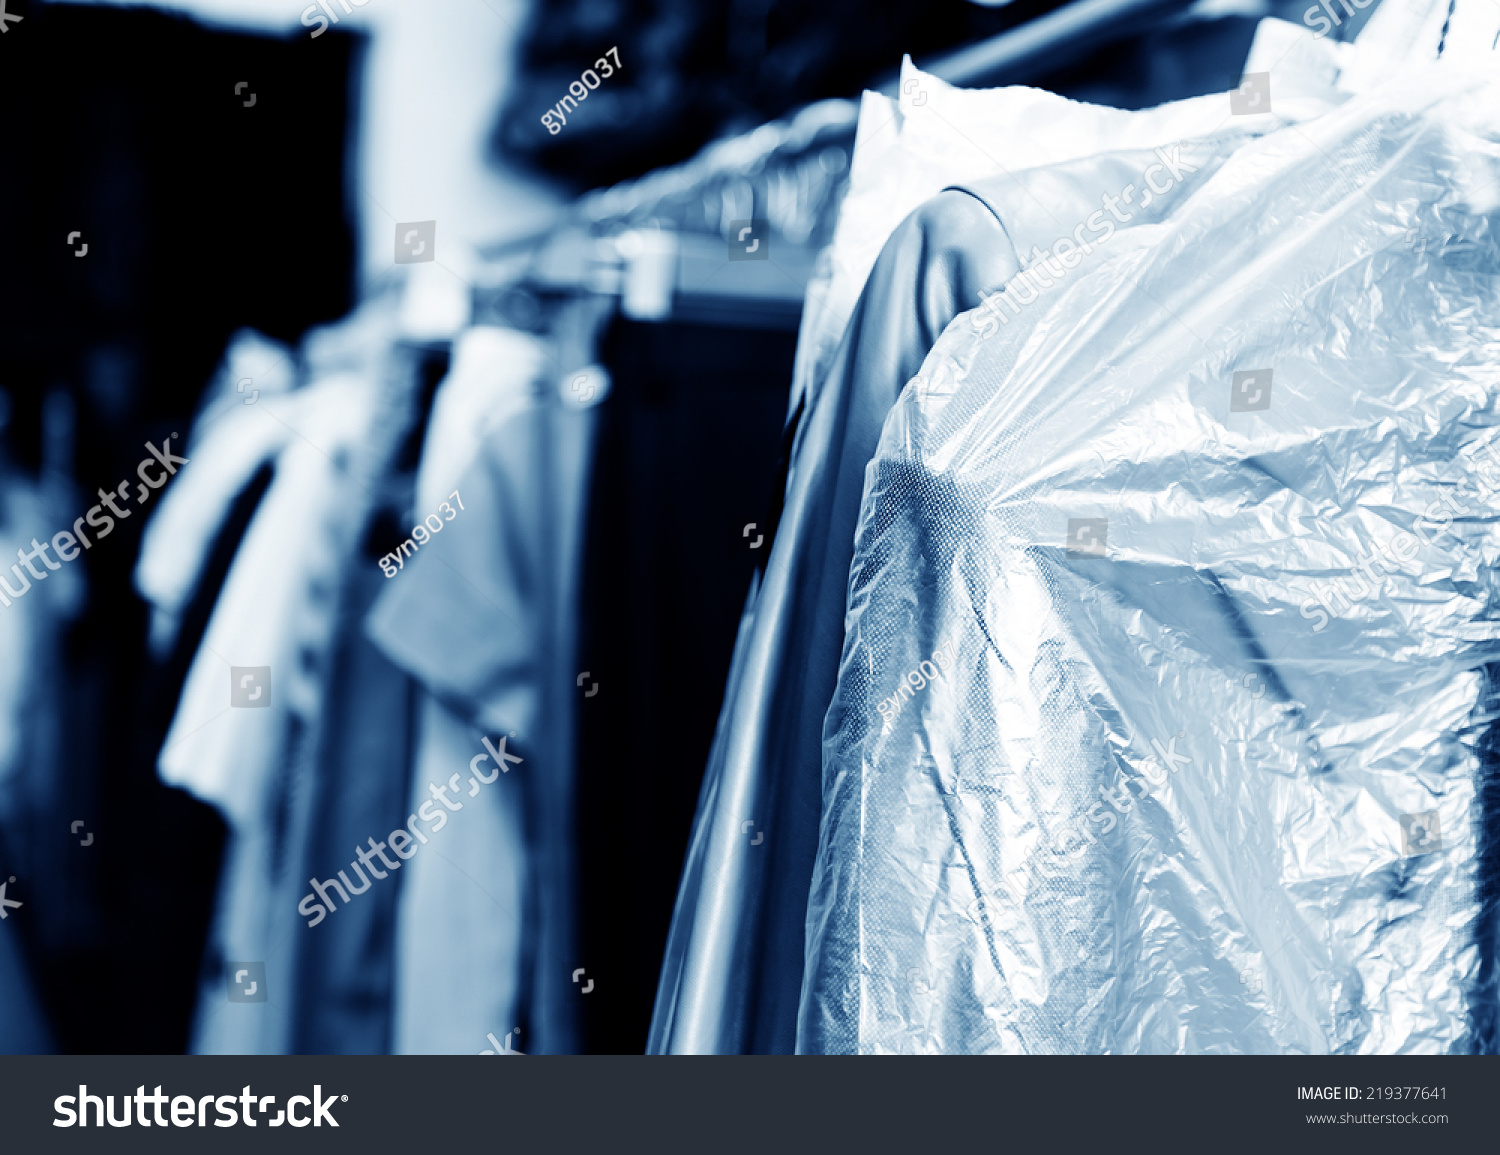 Laundry, hanging on the racks of old clothes. #219377641